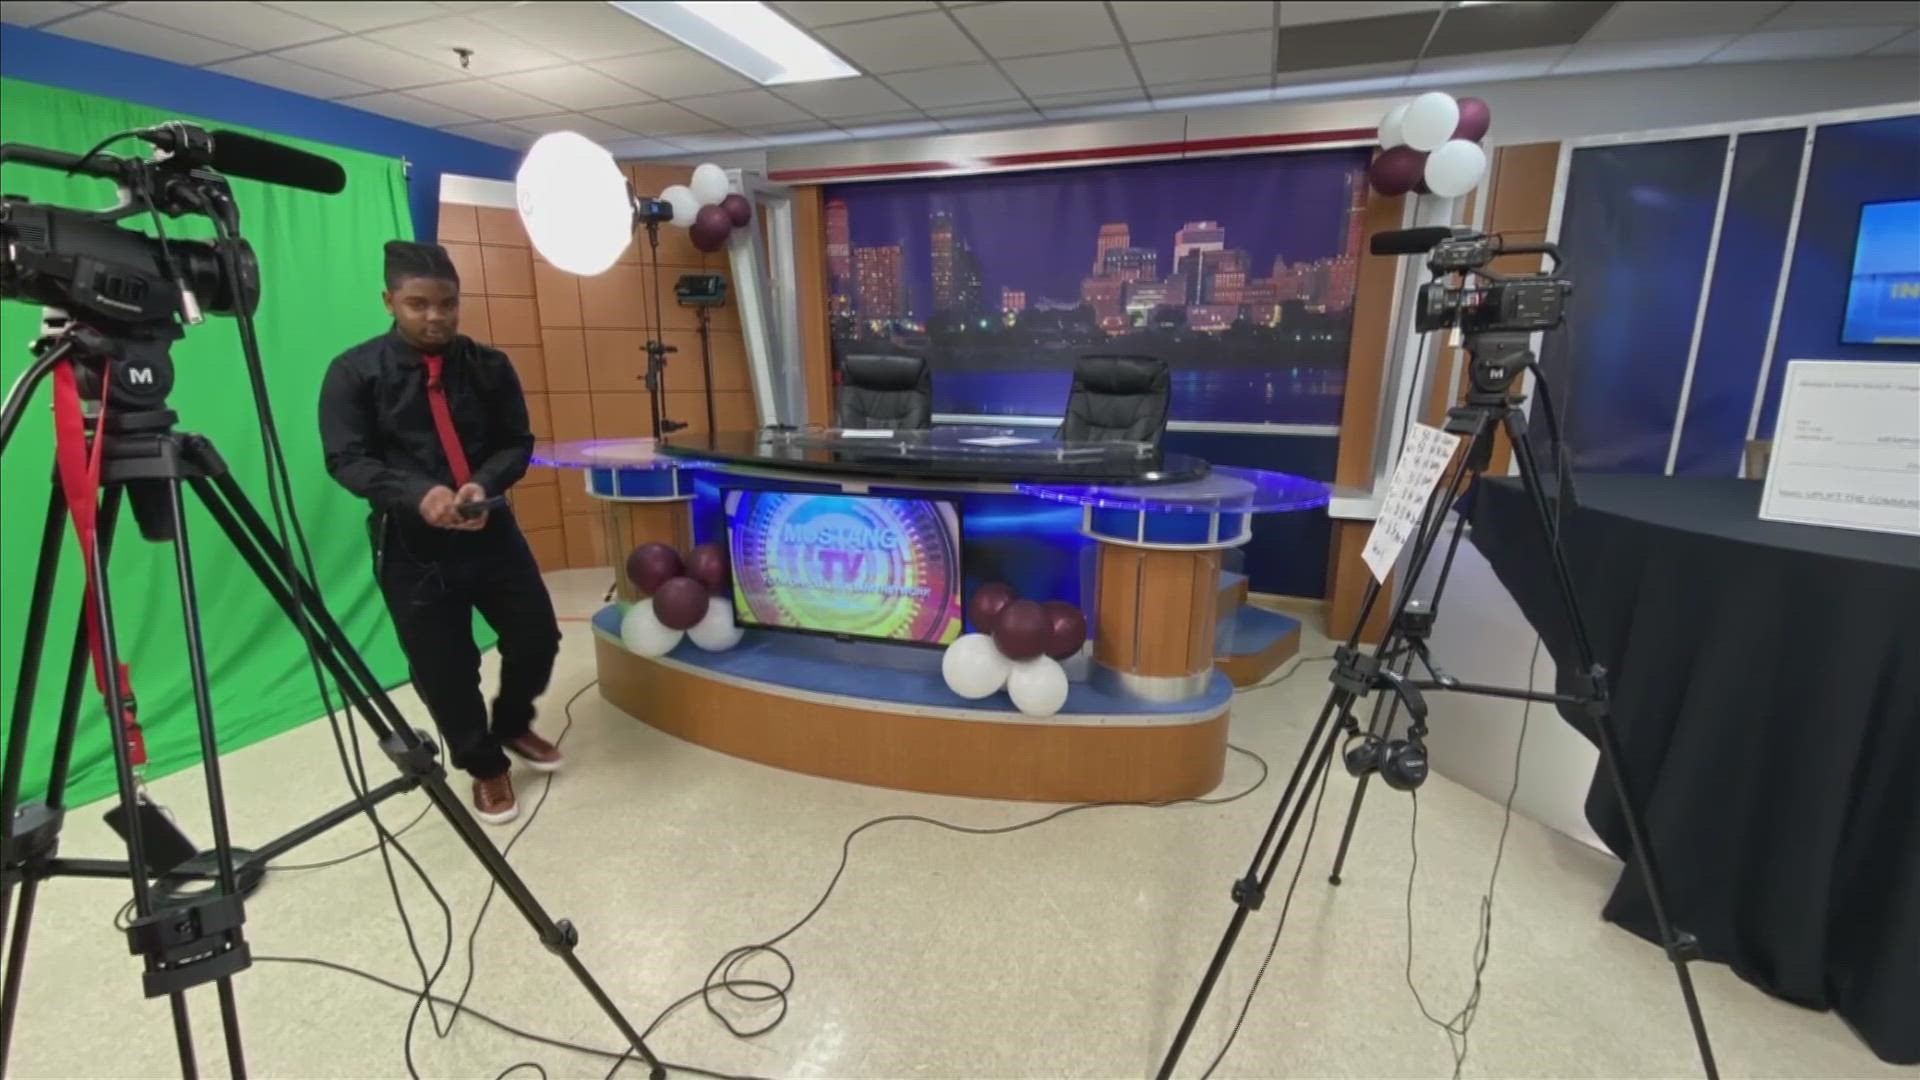 The new Mustang TV studio made its debut Tuesday morning, and it features the former ABC24 news set, which we donated to the school.